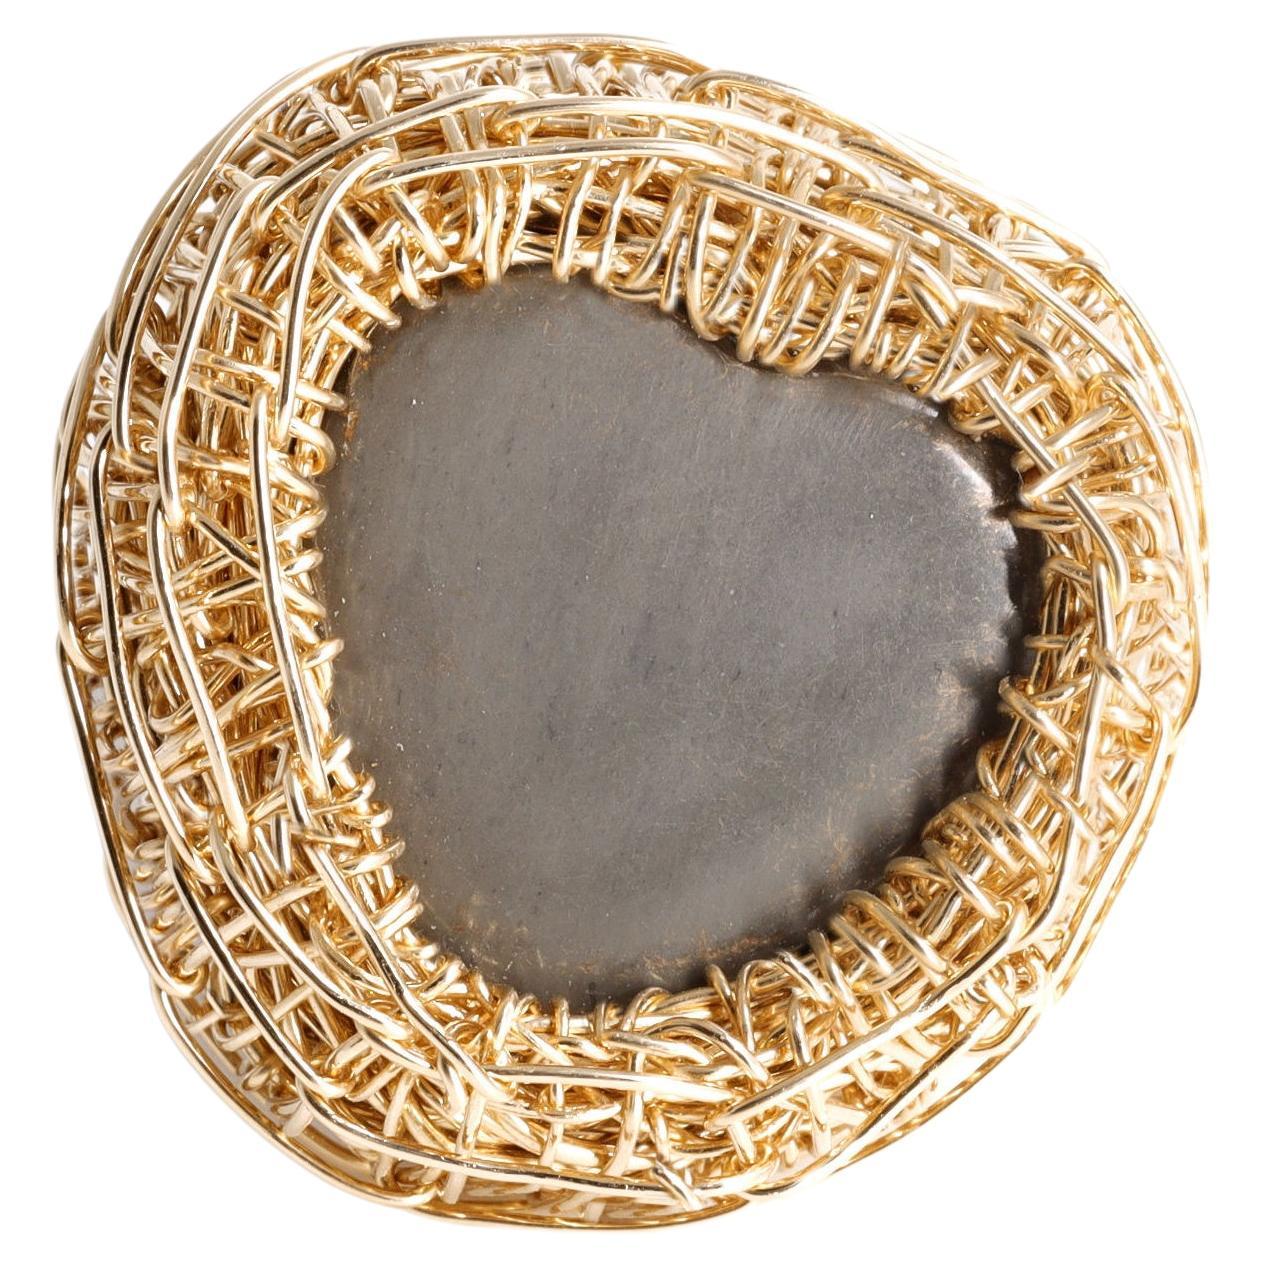 Heart Shaped Grey Stone Statement Cocktail Ring in 14 K Gold F. by the Artist For Sale